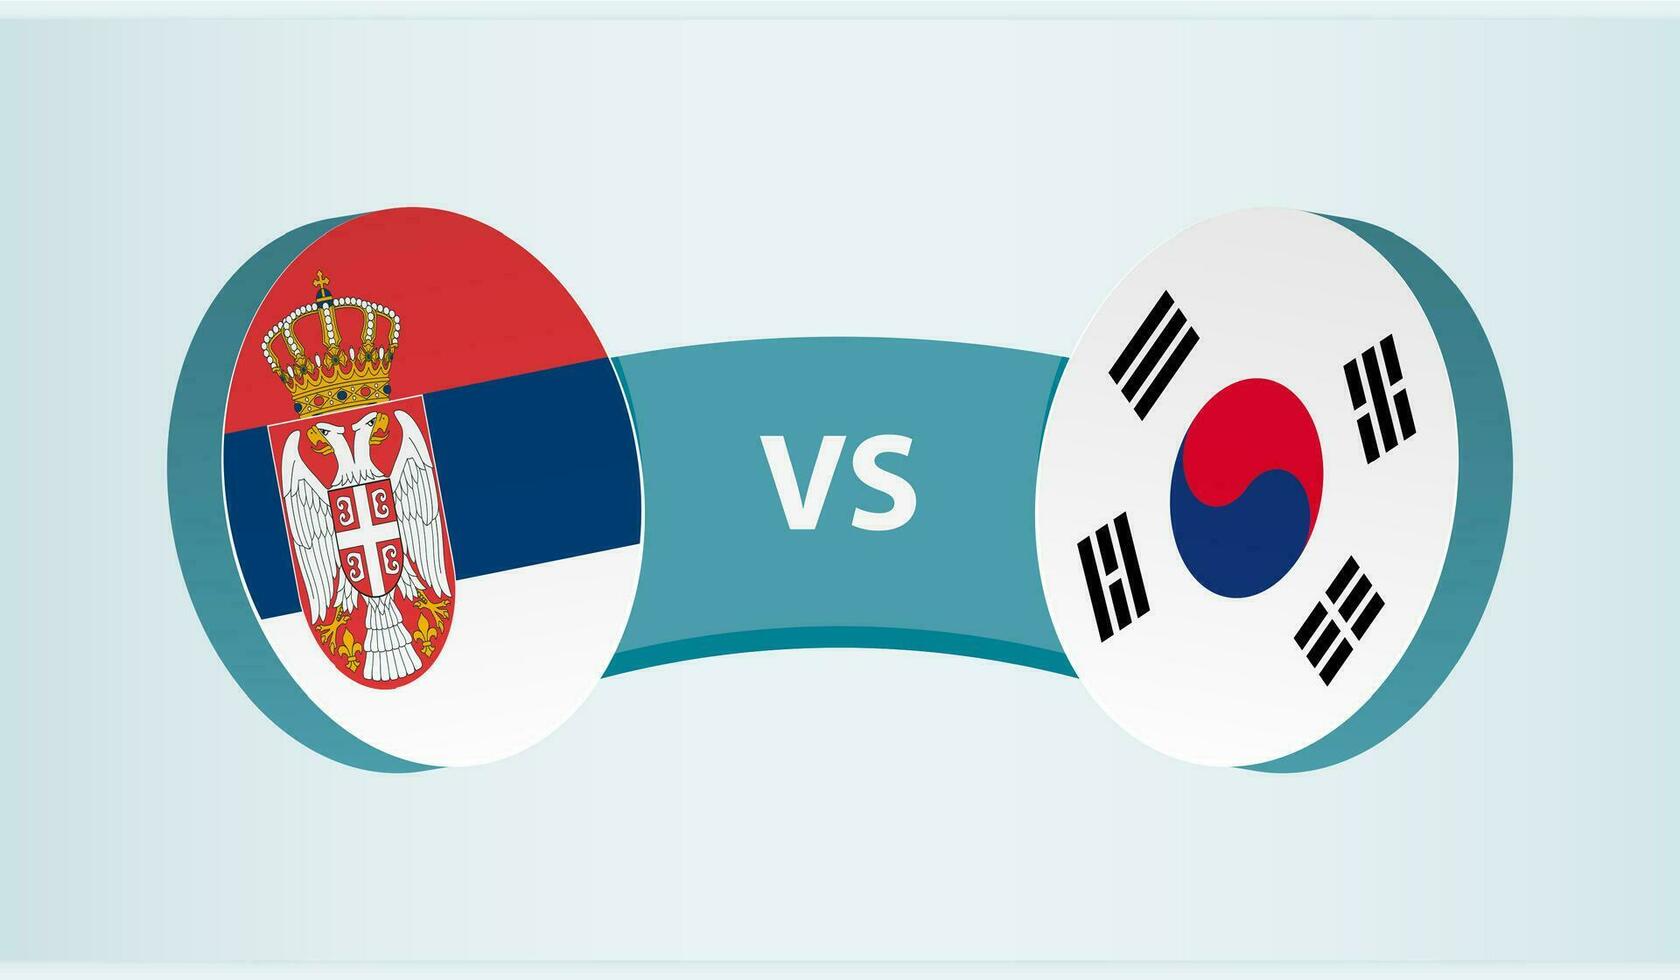 Serbia versus South Korea, team sports competition concept. vector